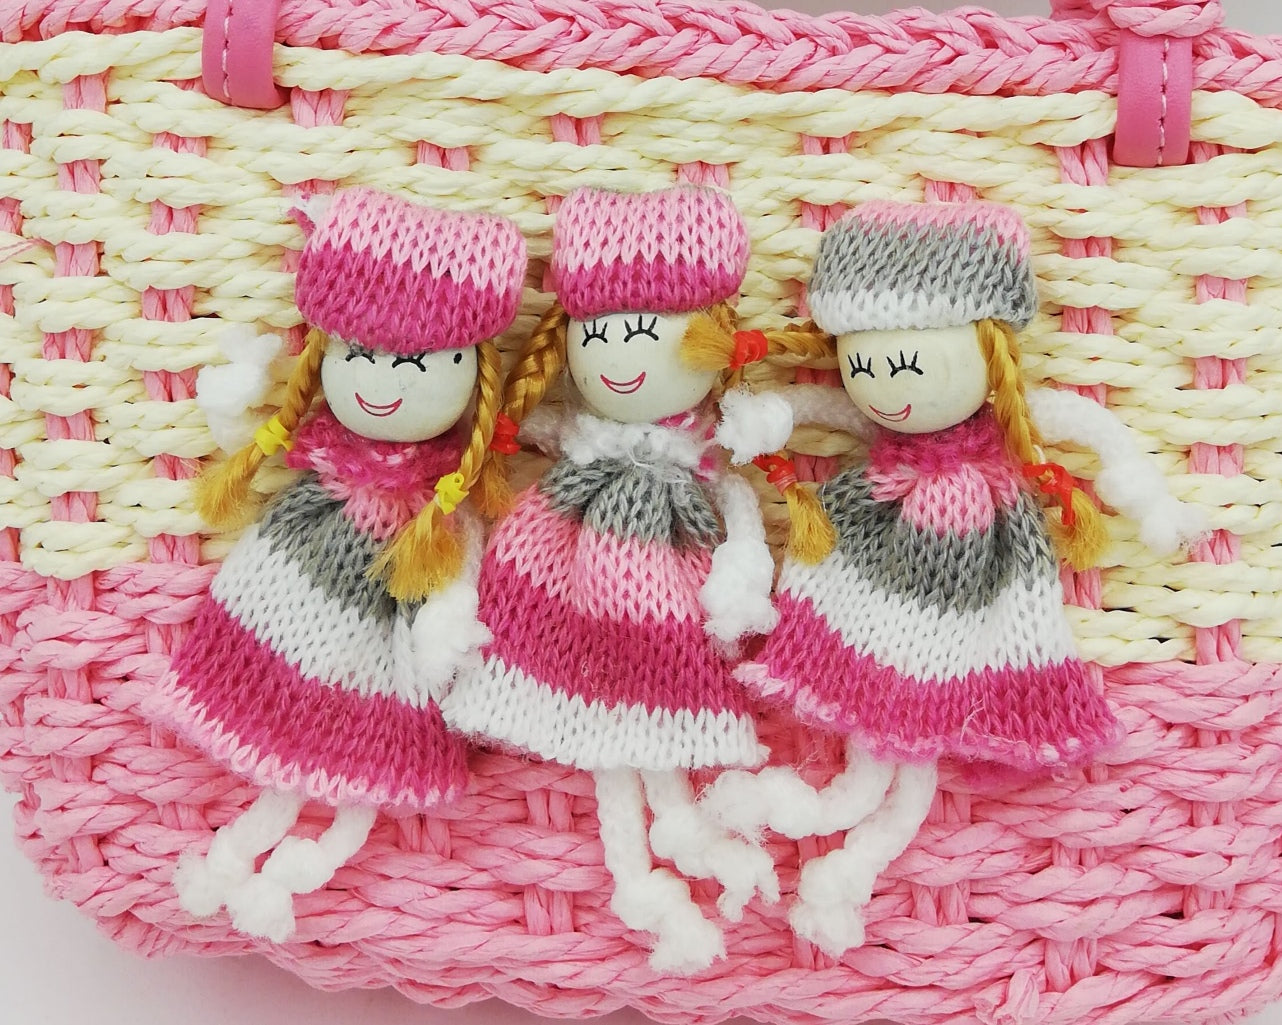 Girl Basket with Dollies